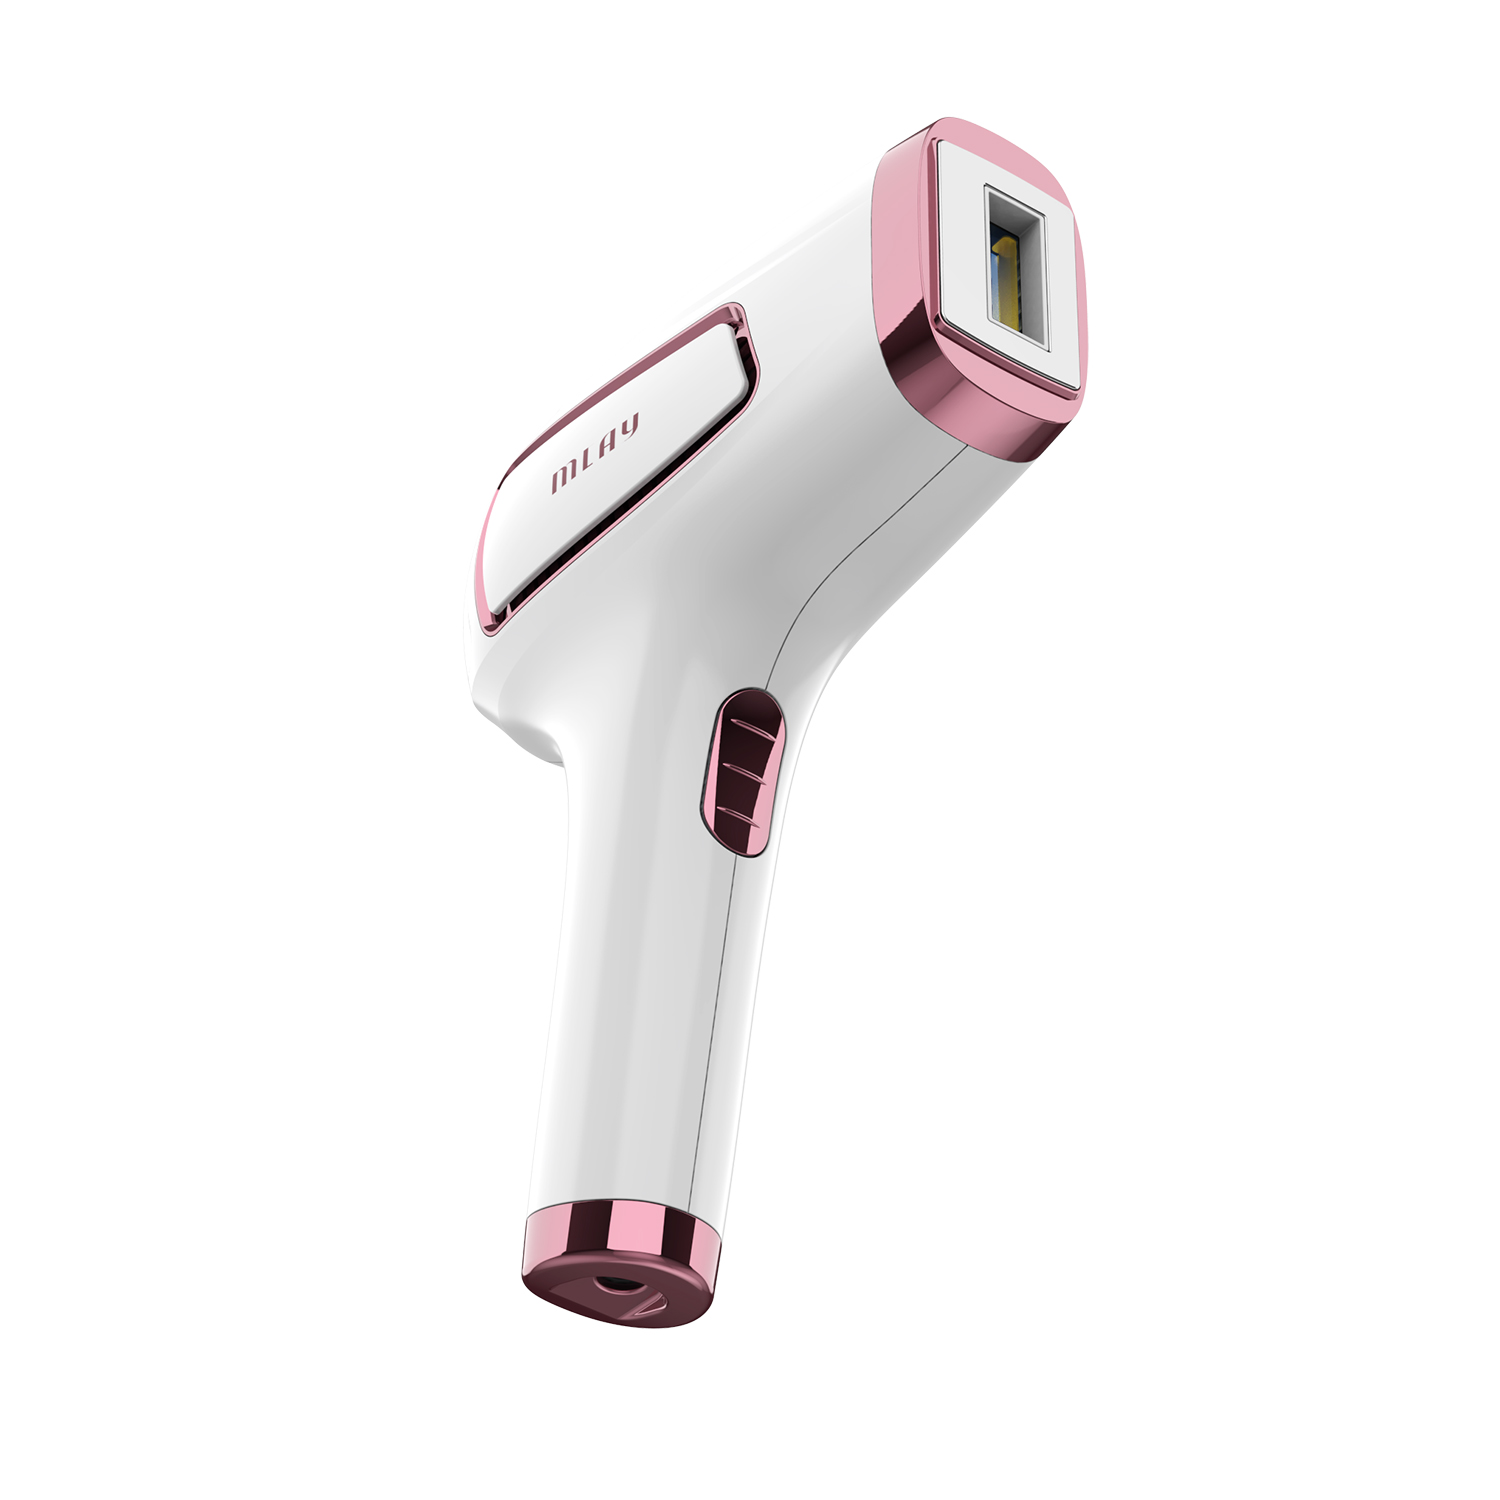 Ipl Home Use Hair Removal Ice Cooling Home Use Ipl Hair Removal Device Hair Removal For Women Whole Body 